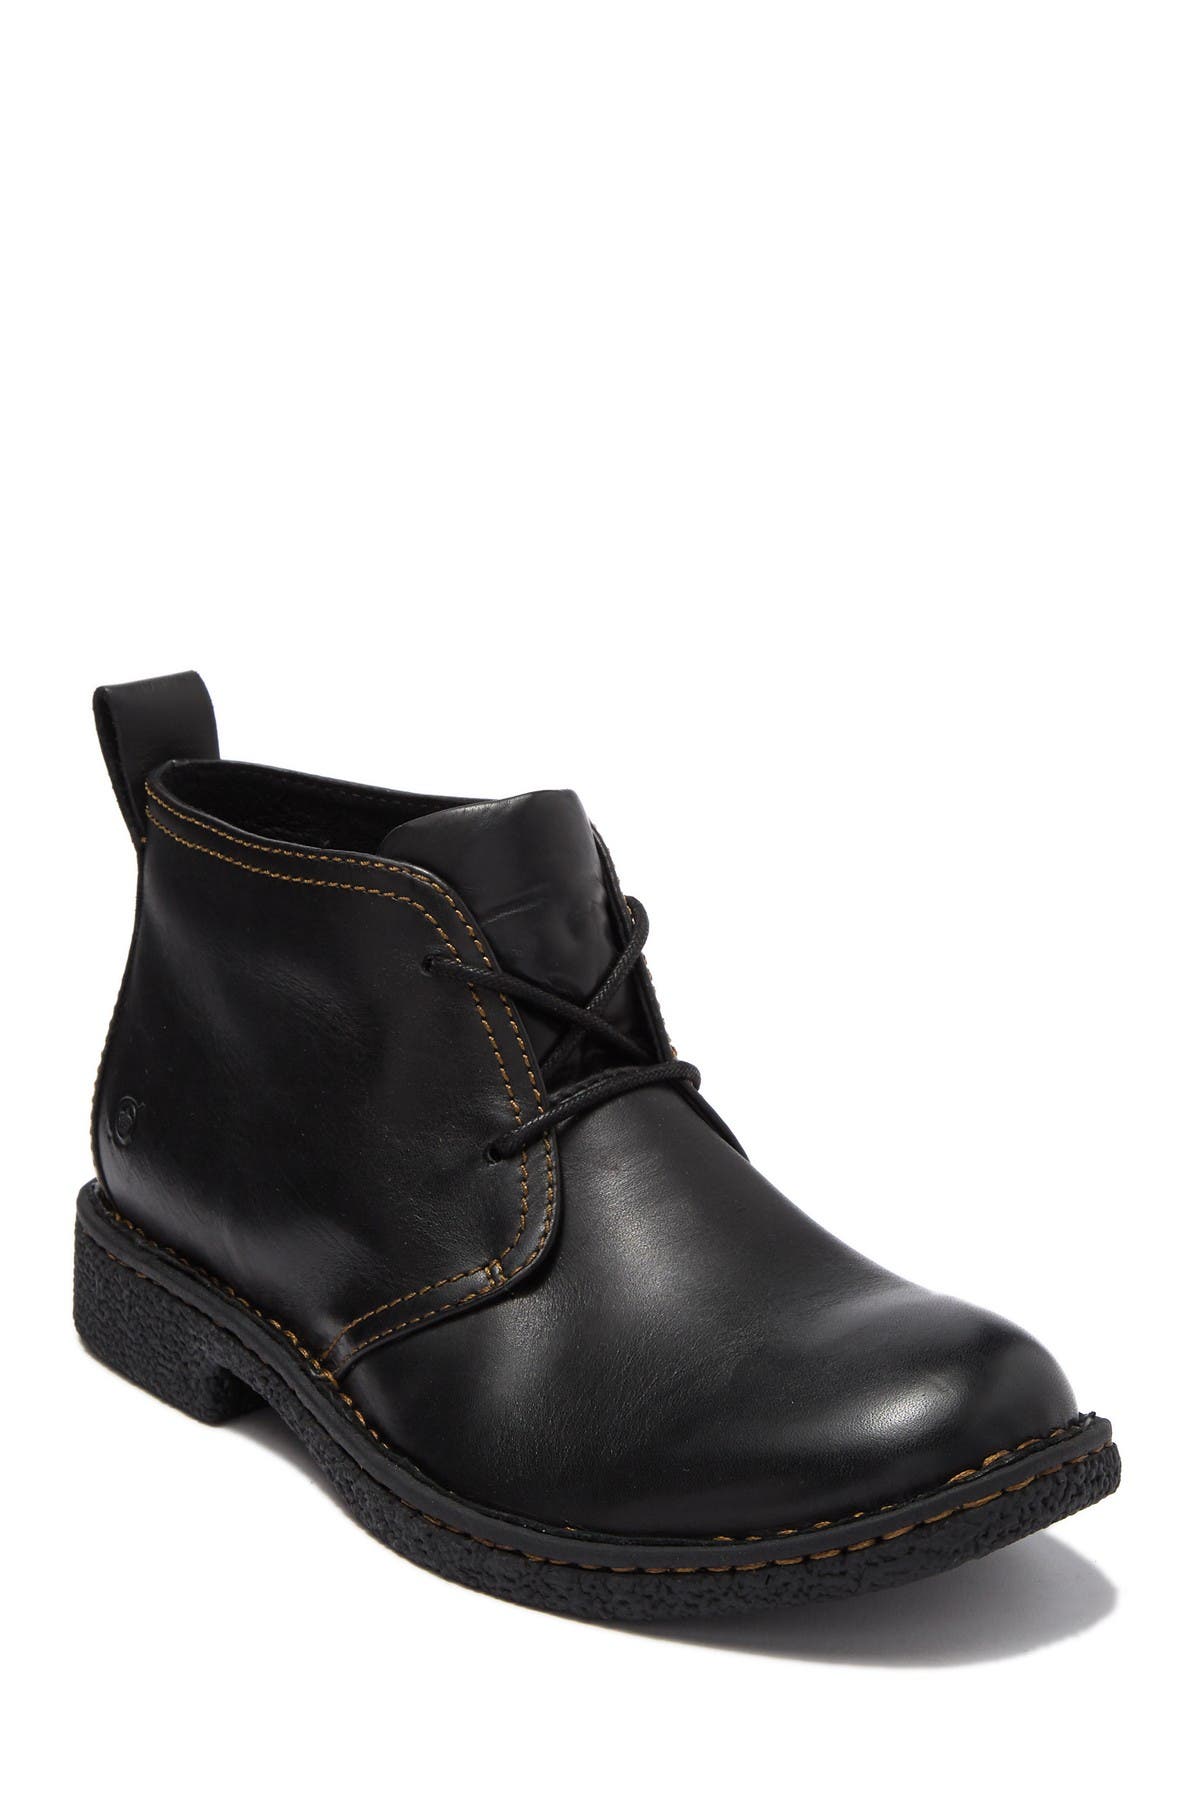 born boots womens nordstrom